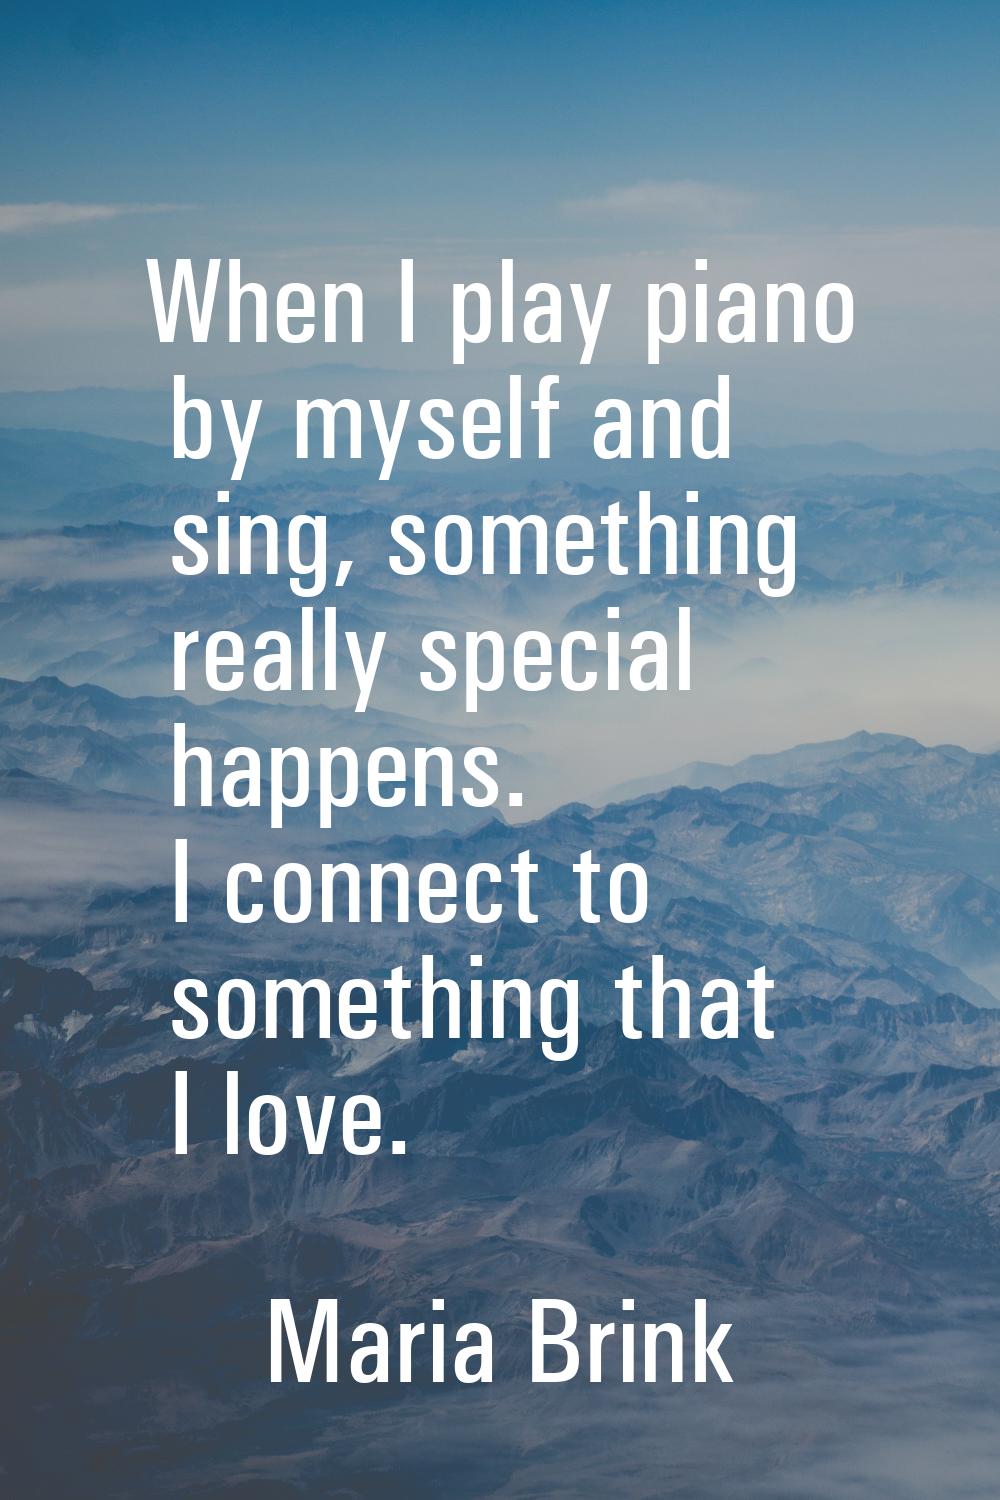 When I play piano by myself and sing, something really special happens. I connect to something that